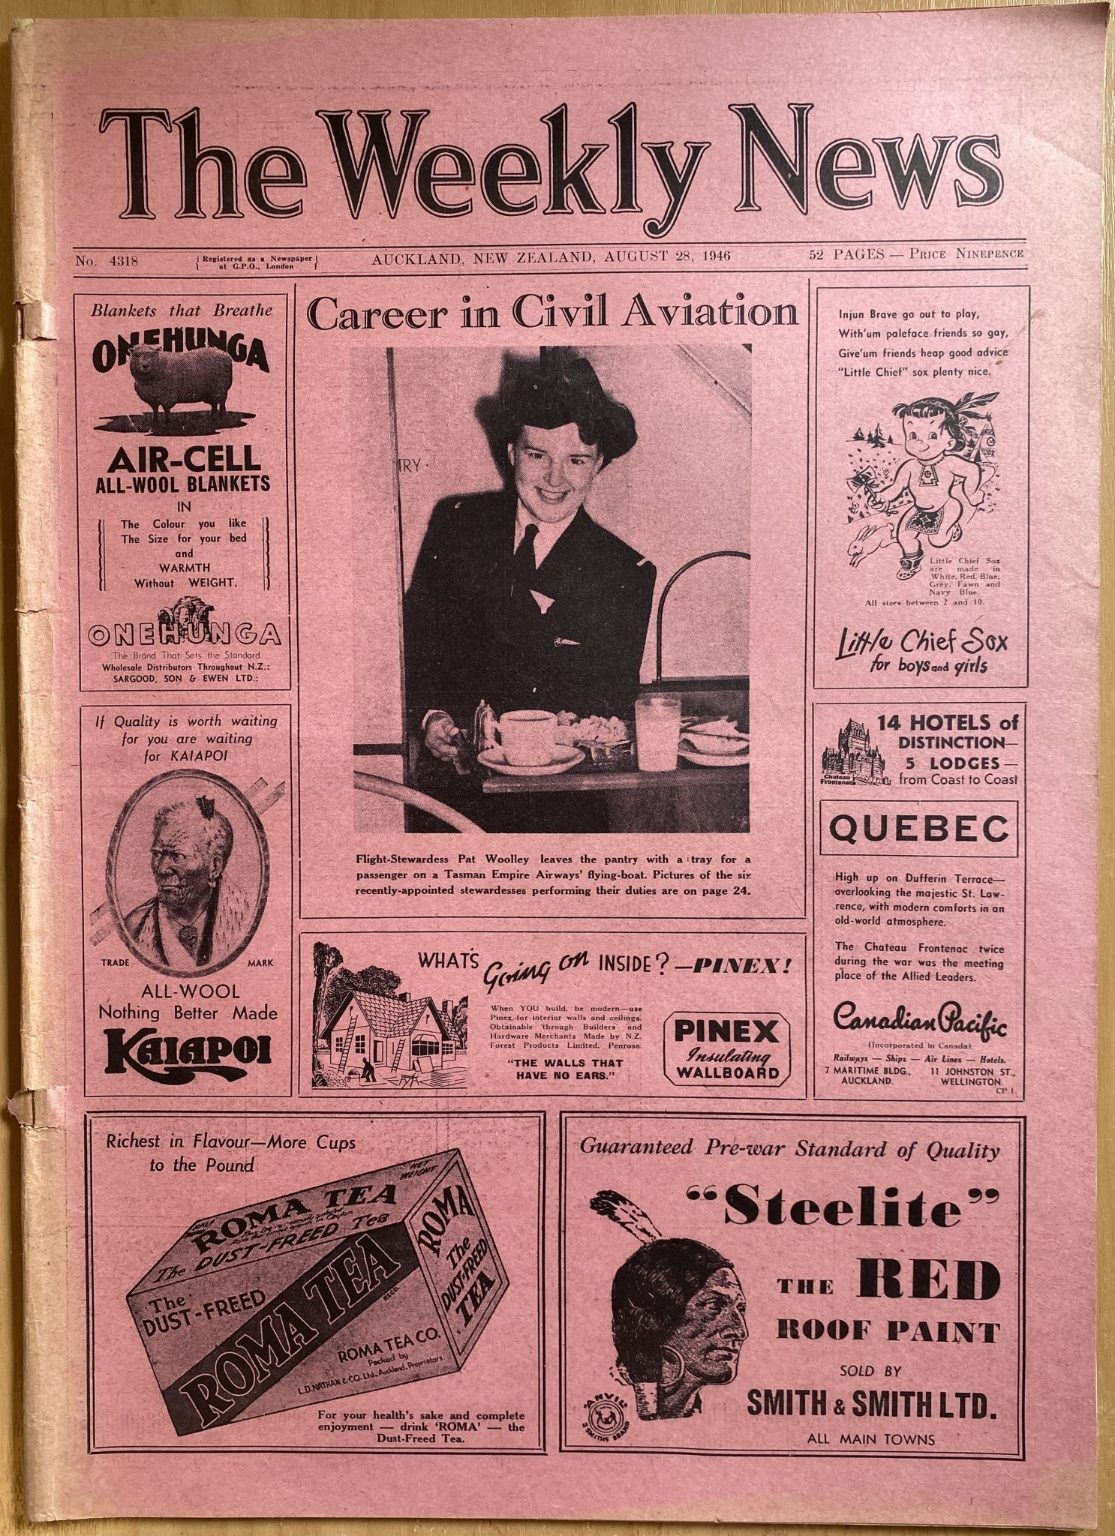 OLD NEWSPAPER: The Weekly News - No. 4318, 28 August 1946